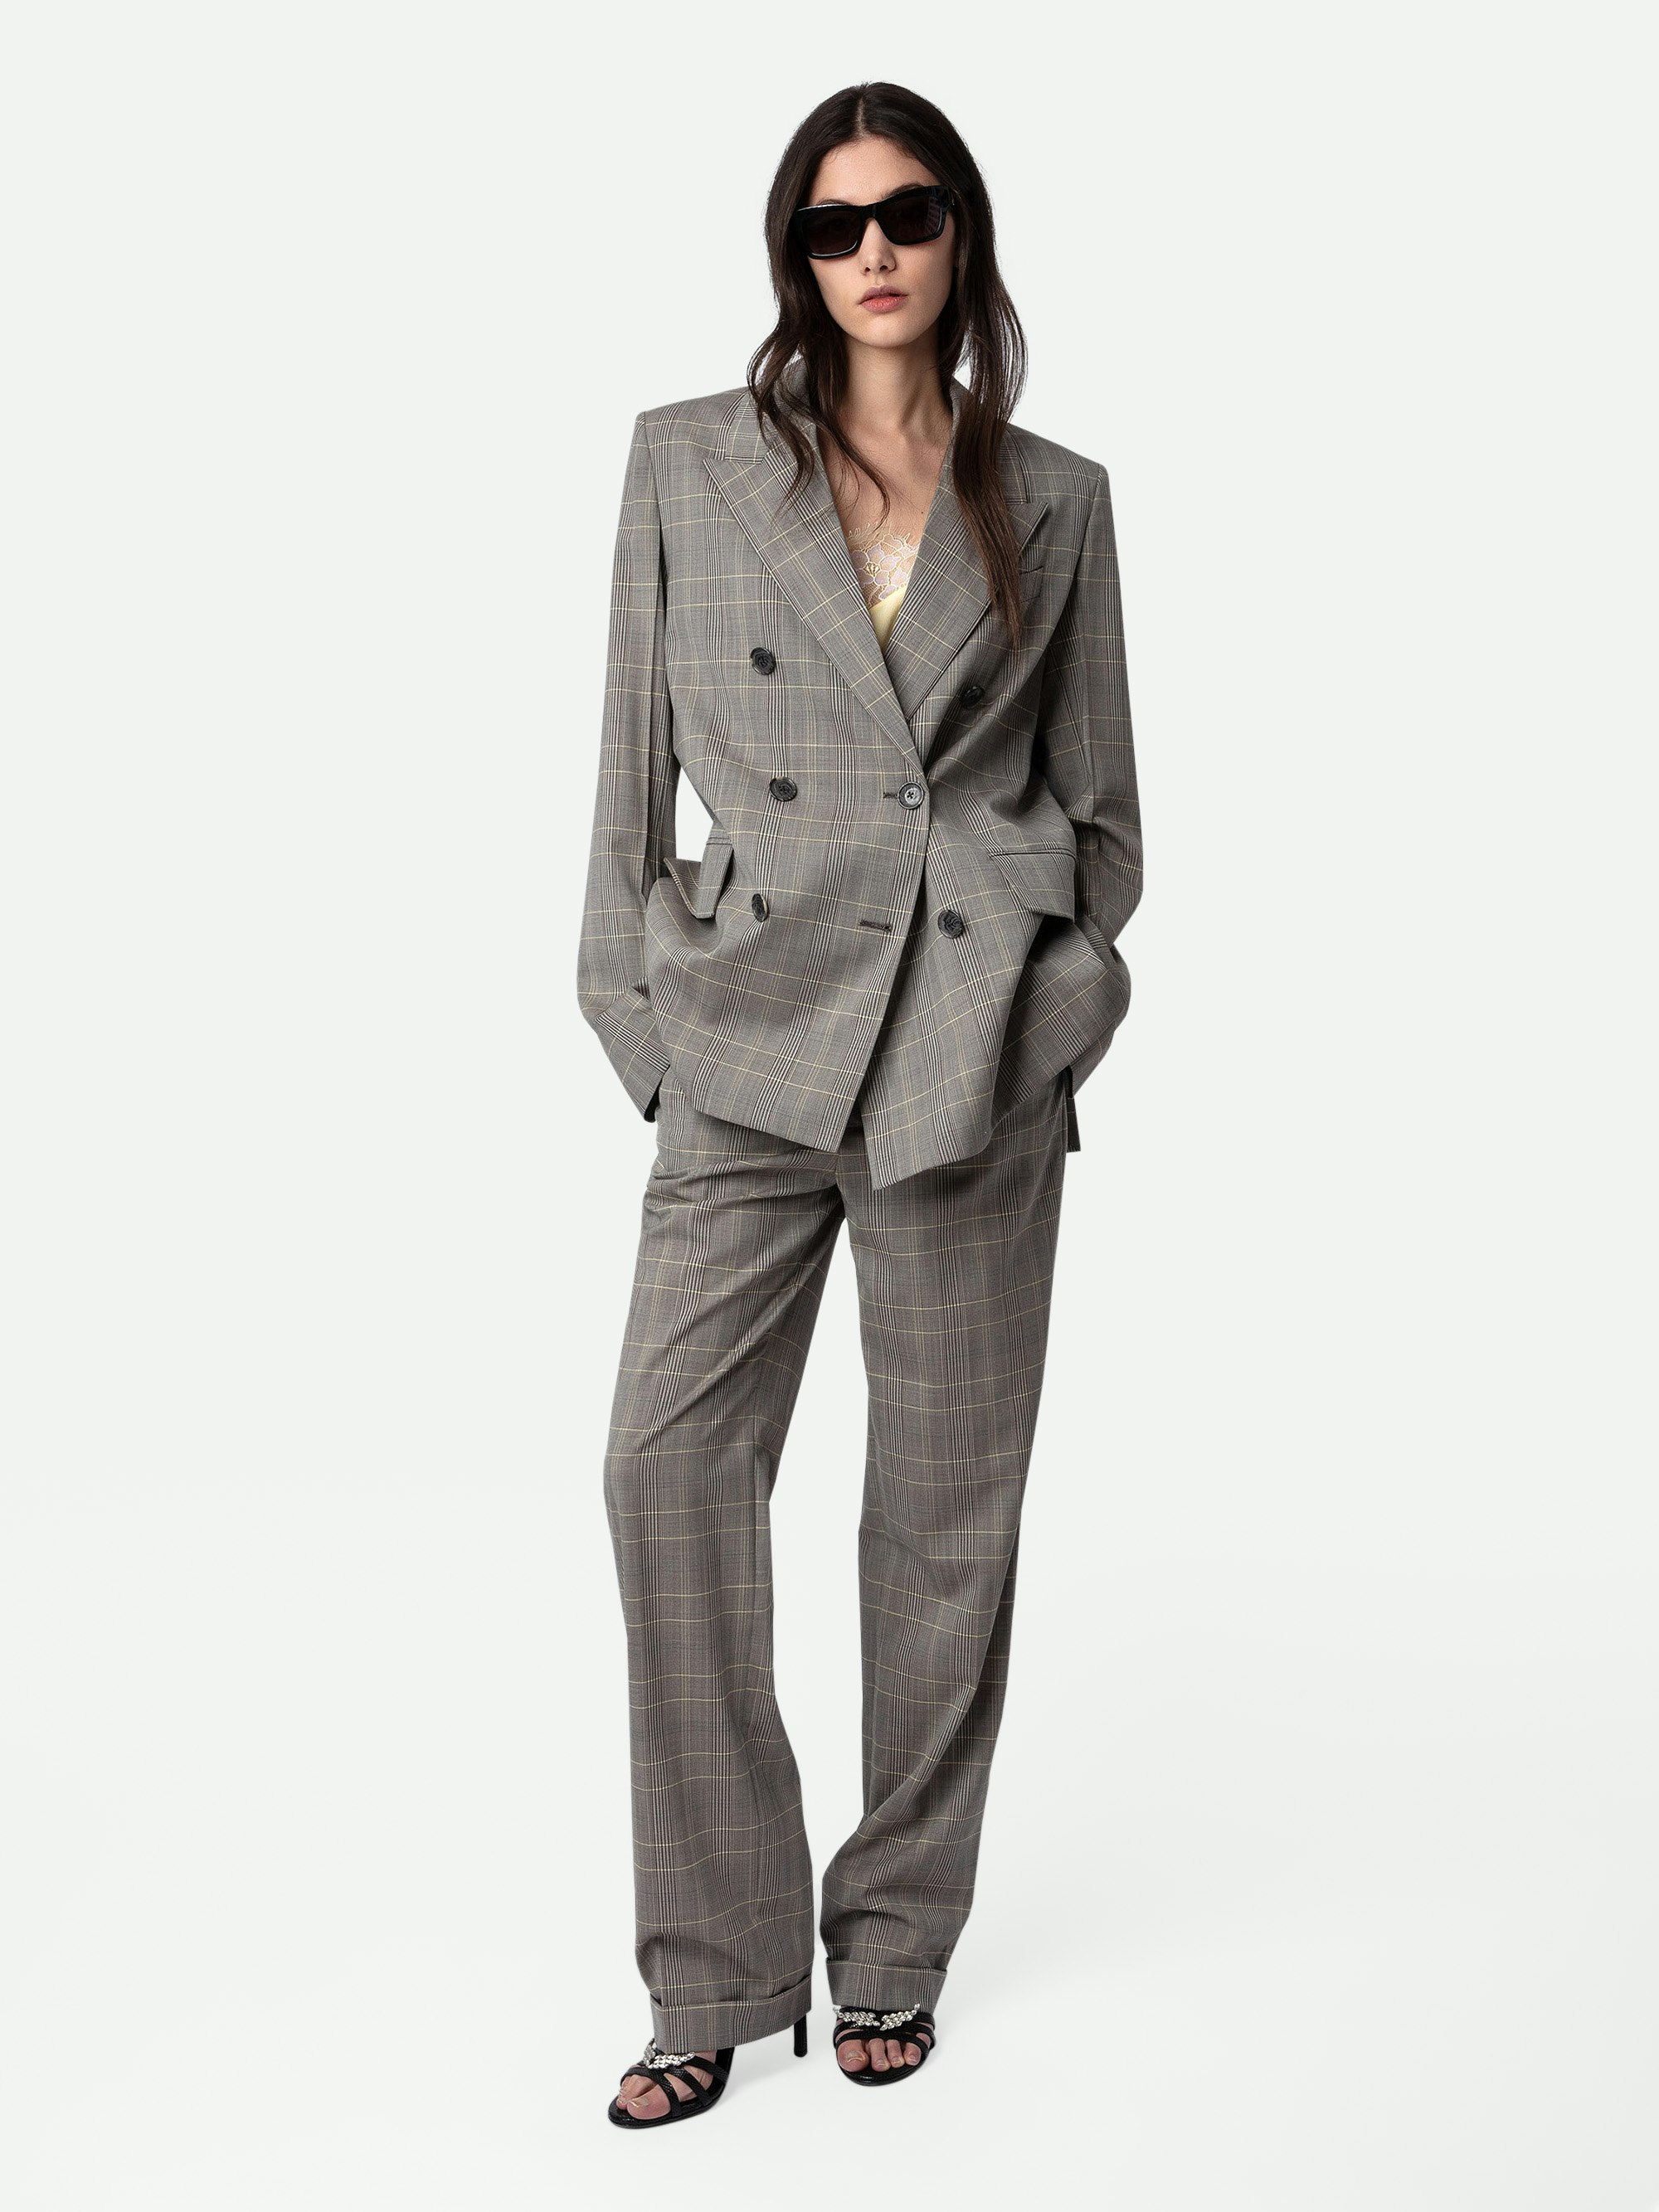 Vaena Blazer - Oversized checked grey wool blazer with tailored collar, button closure and shoulder pads.